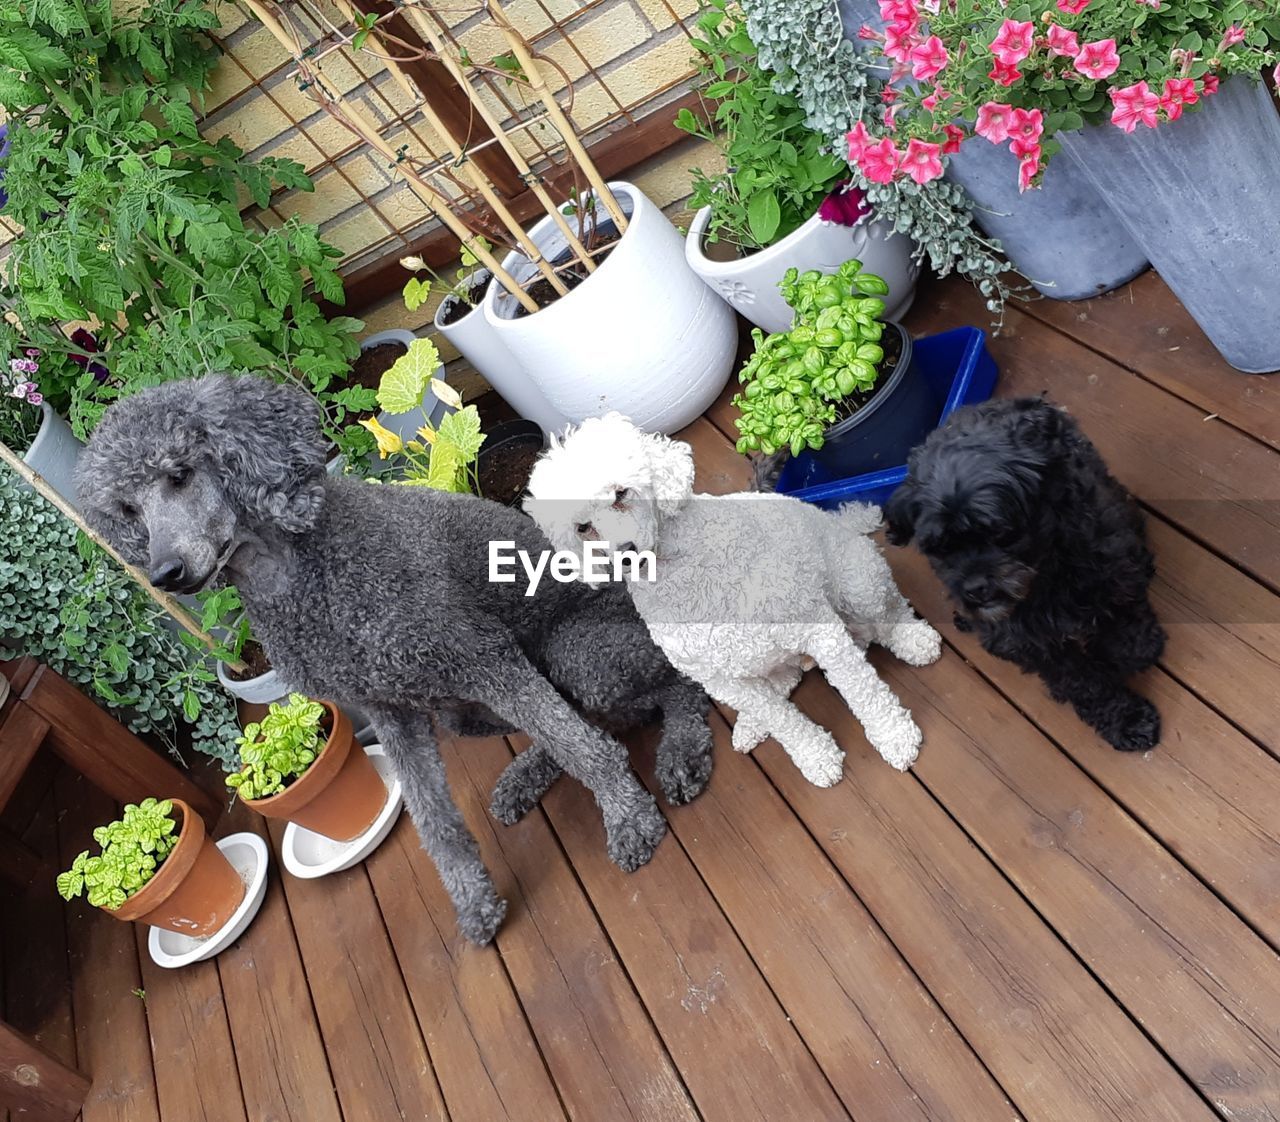 HIGH ANGLE VIEW OF DOG BY FLOWER POTS